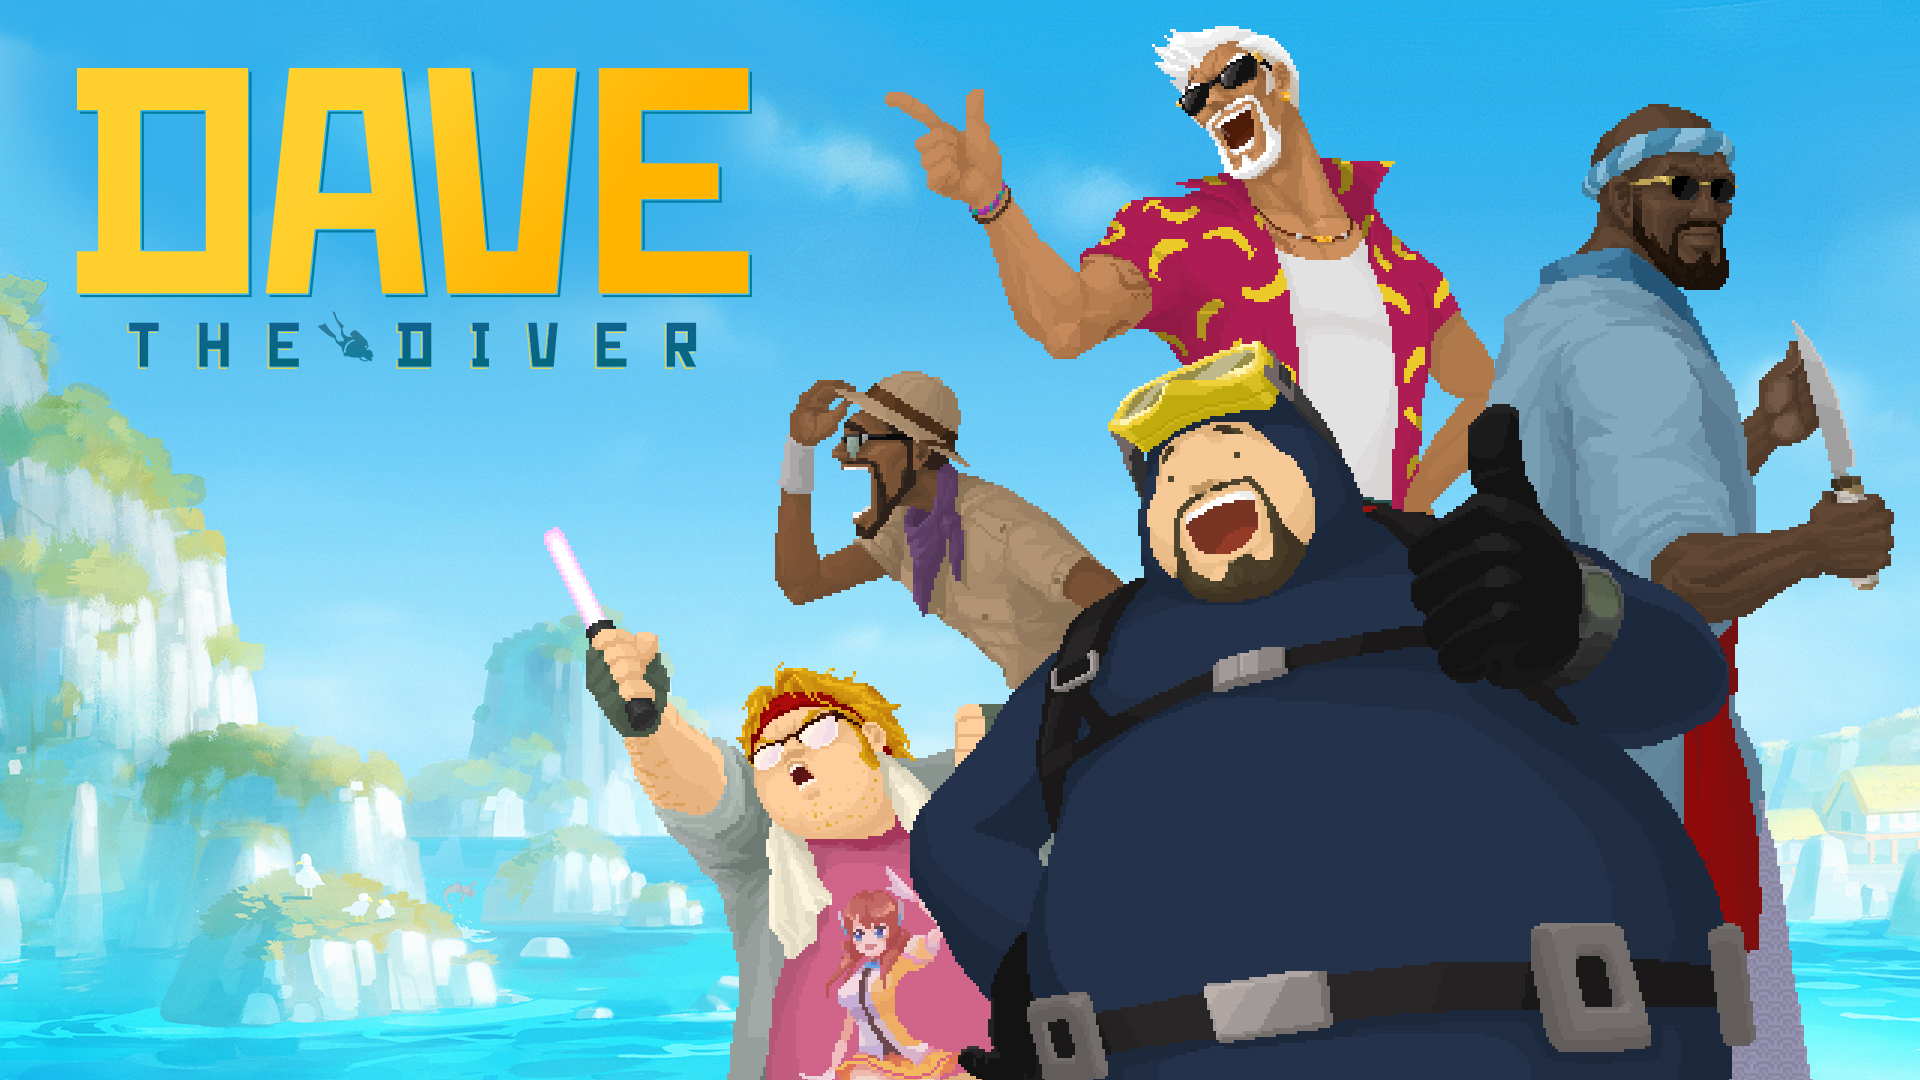 DAVE THE DIVER physical edition for Switch launches May 30 worldwide